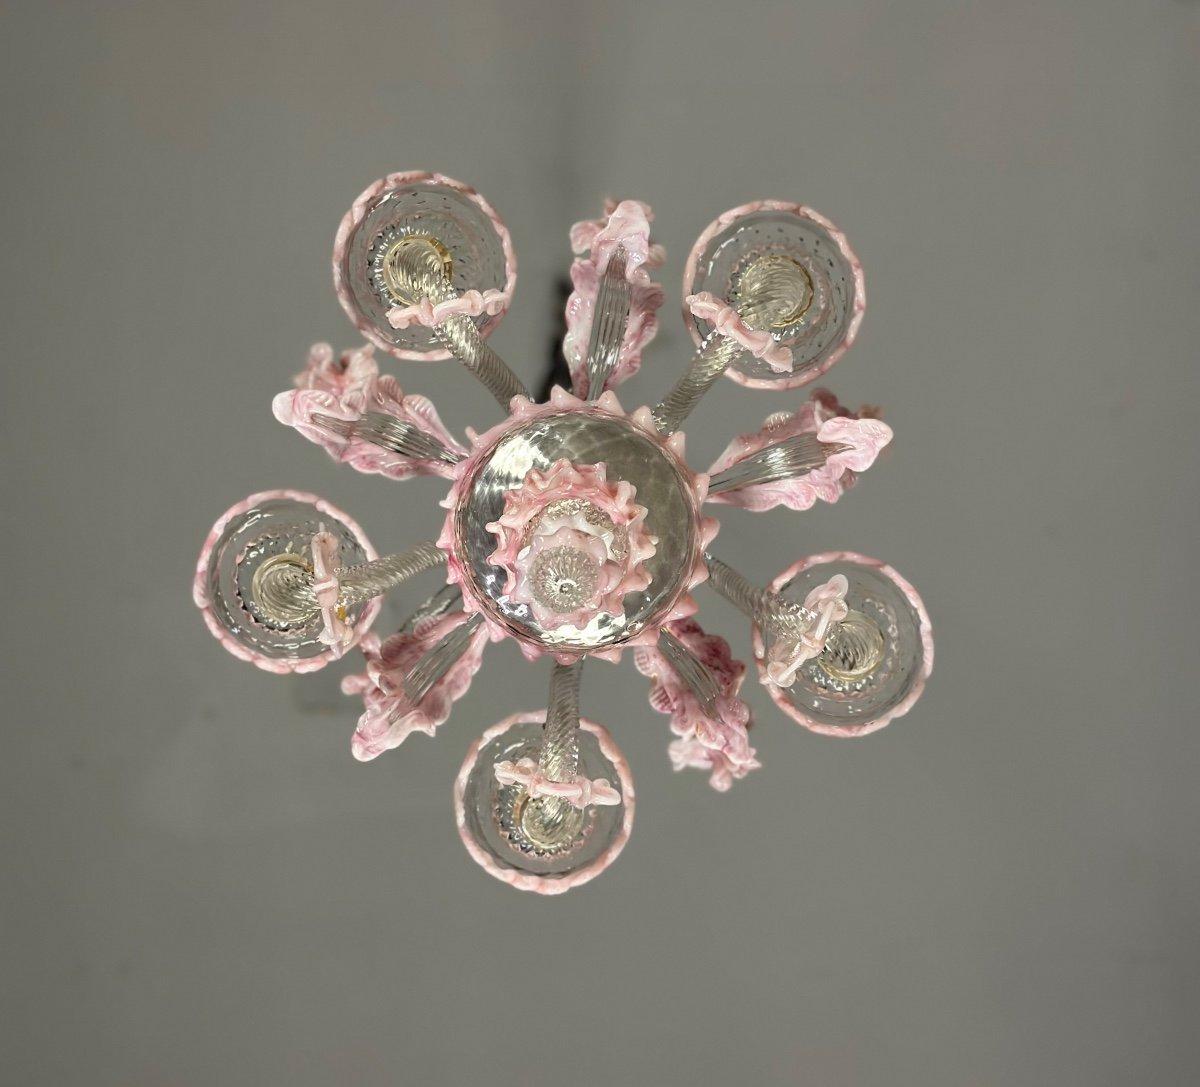 Colorless Murano glass chandelier 8 arms of light, new electrification, three levels of flowers and leaves